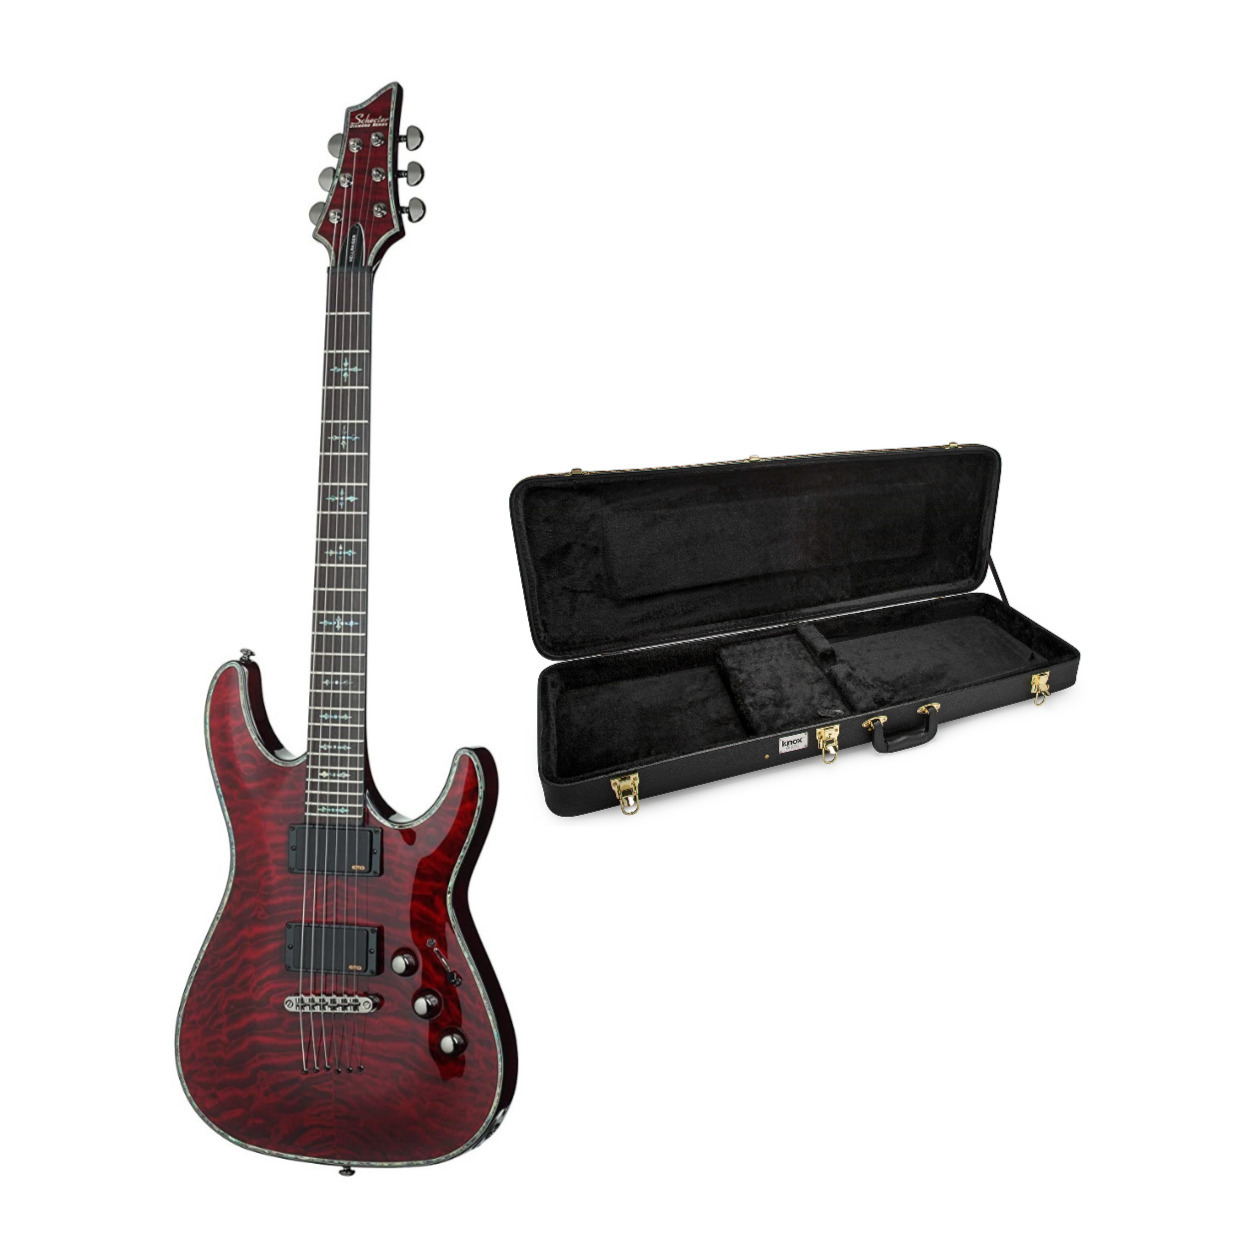 Schecter Hellraiser C-1 6-String Electric Guitar (Right Hand, Black Cherry) with Hard Shell Case in Black/Cherry -  ASGR-1788K1